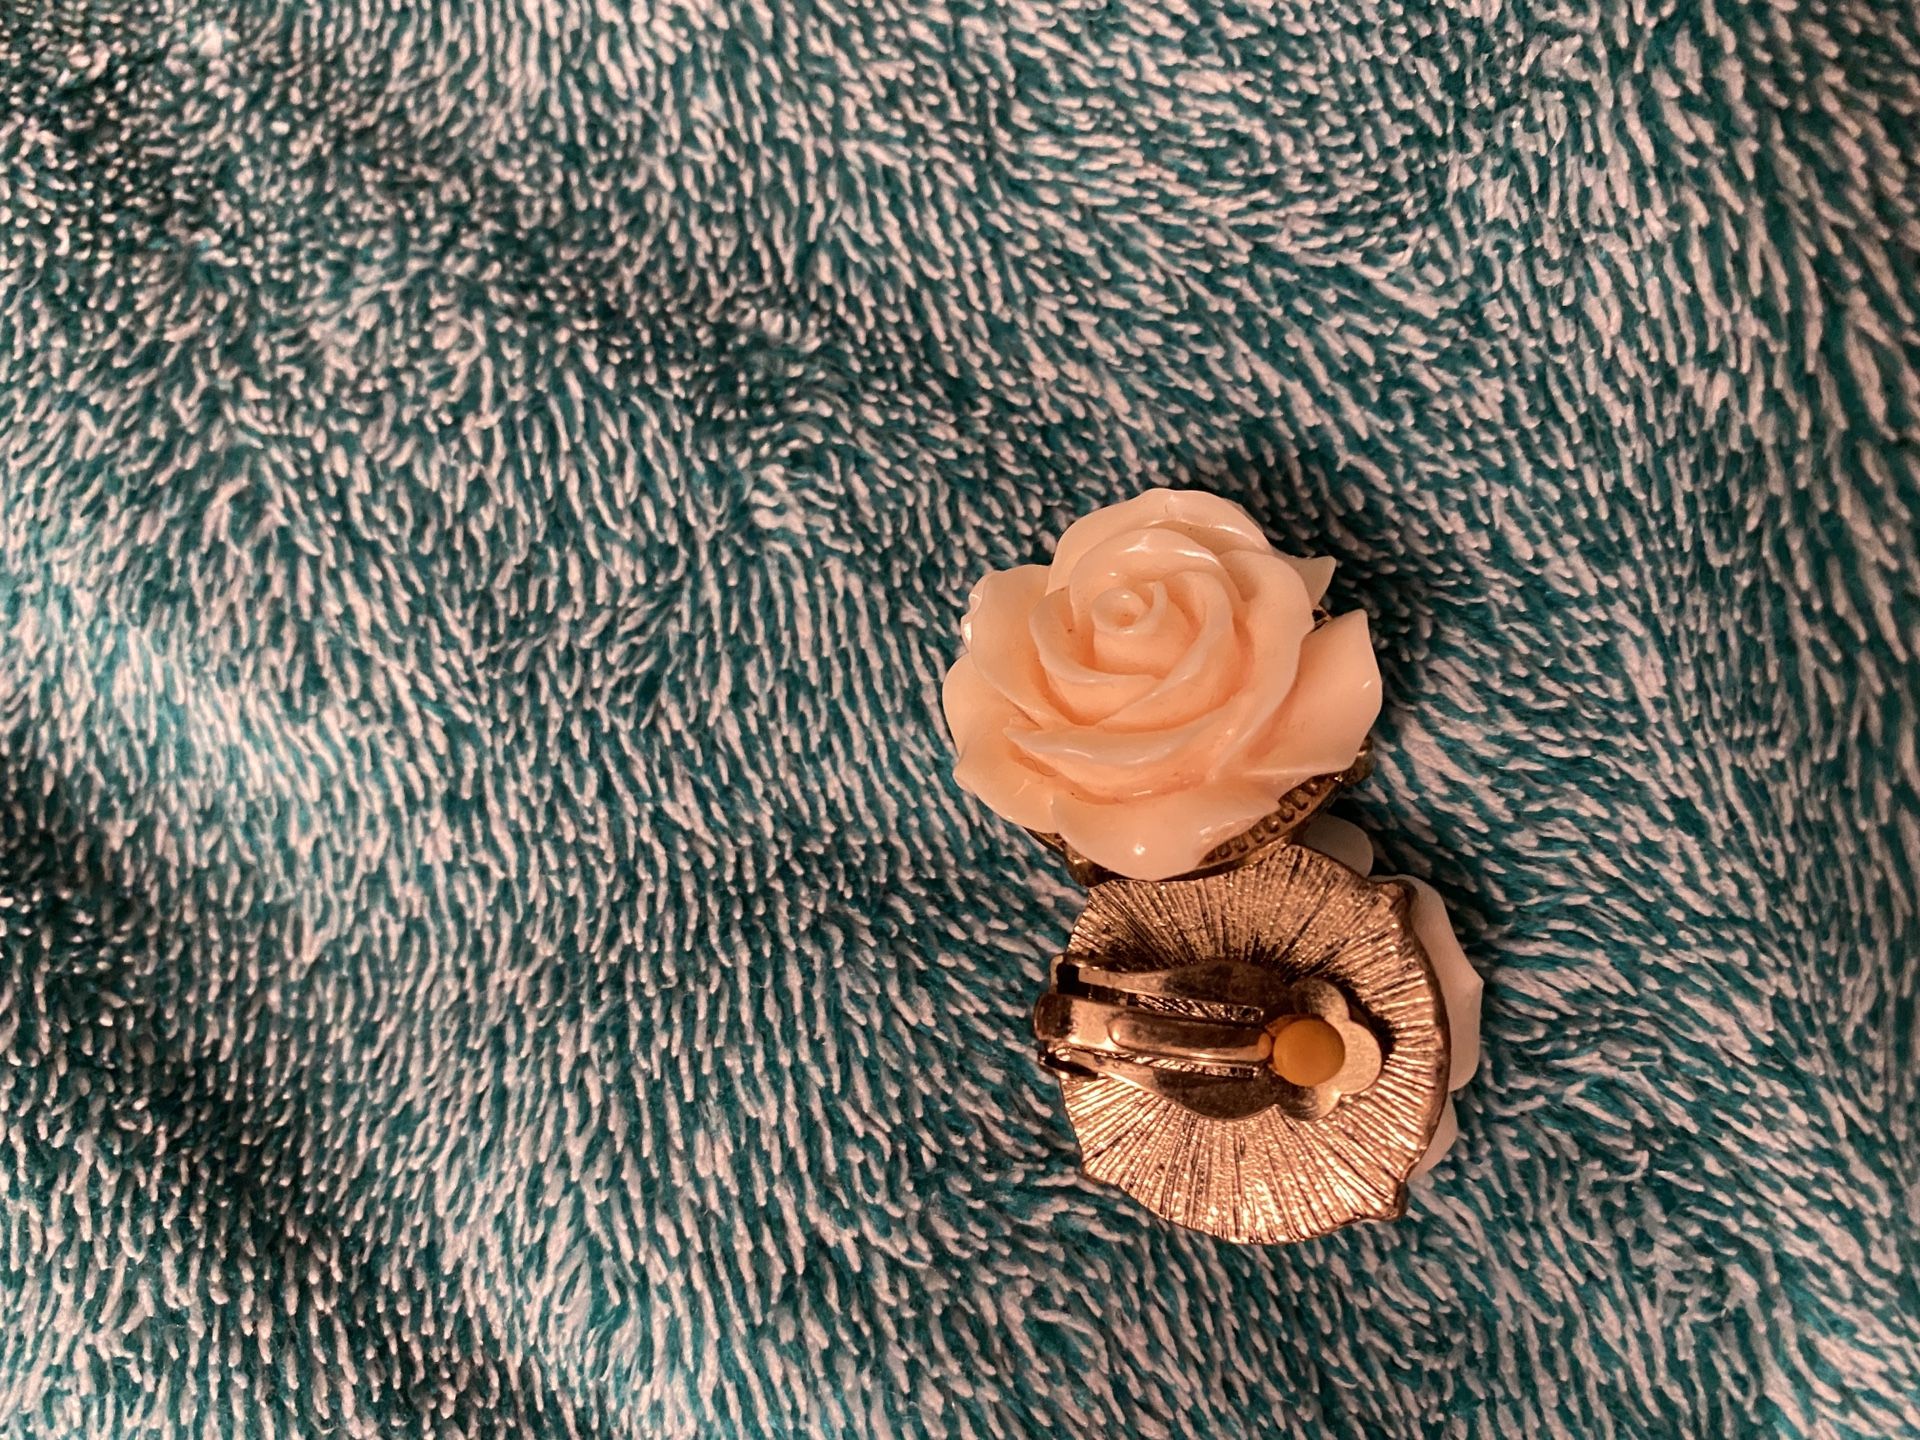 Blush Pink Rose Clip-on Earrings with Gold Metal Backs